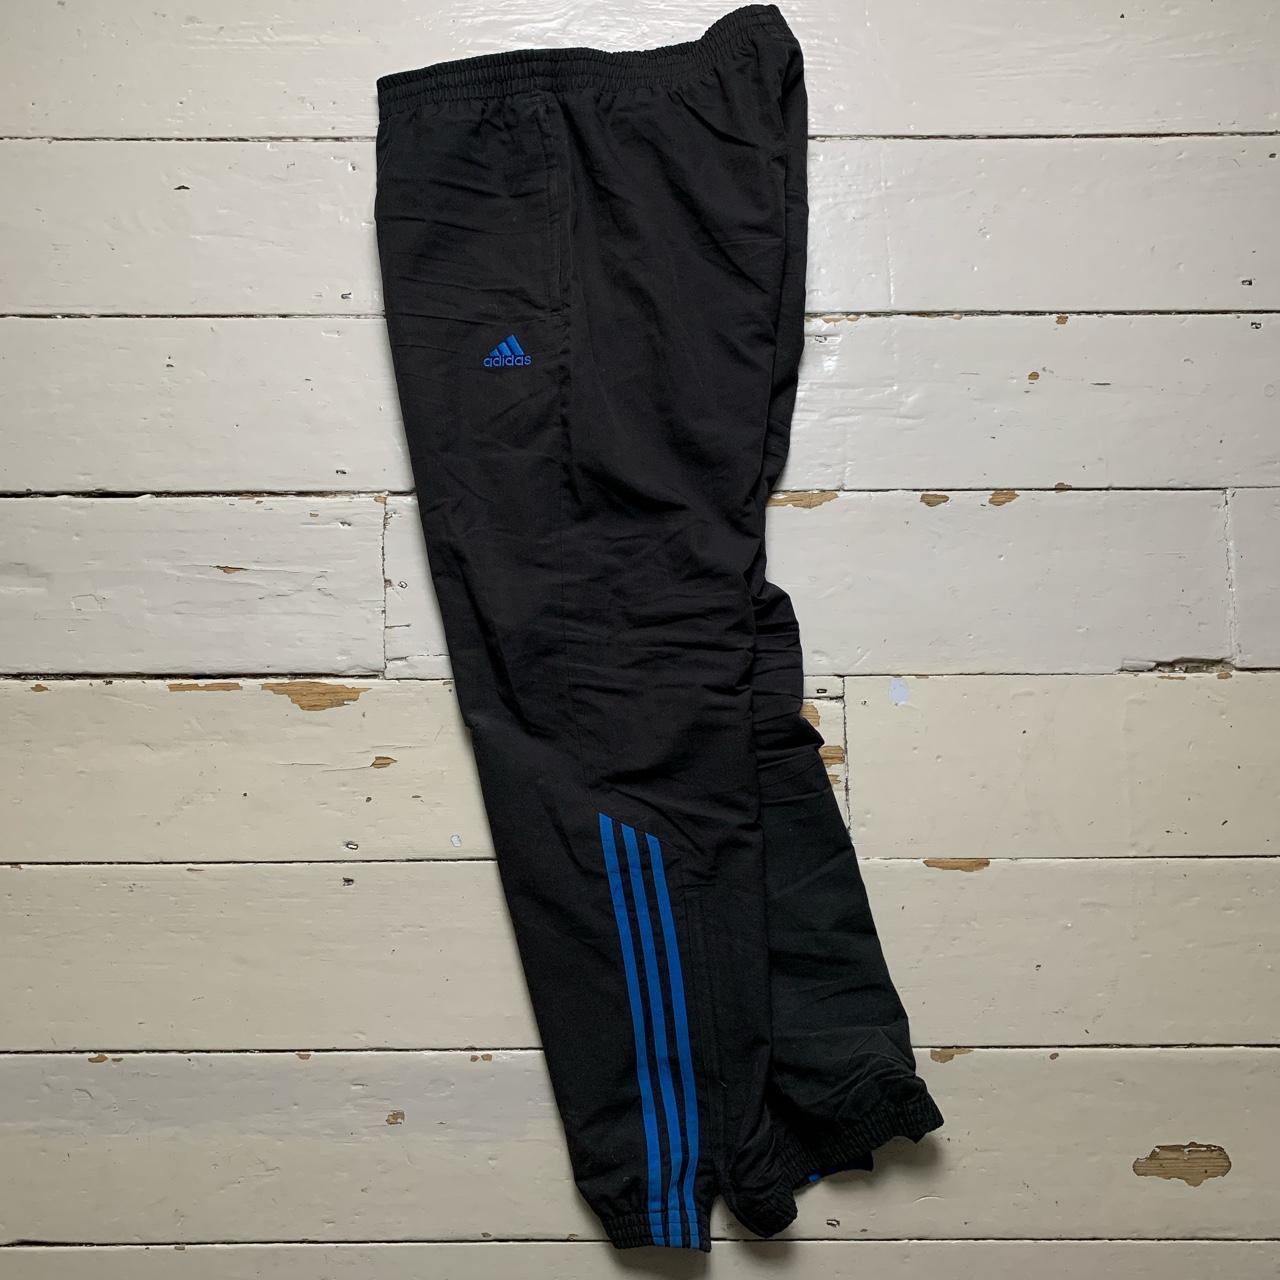 Adidas Black and Blue Baggy Shell Bottoms